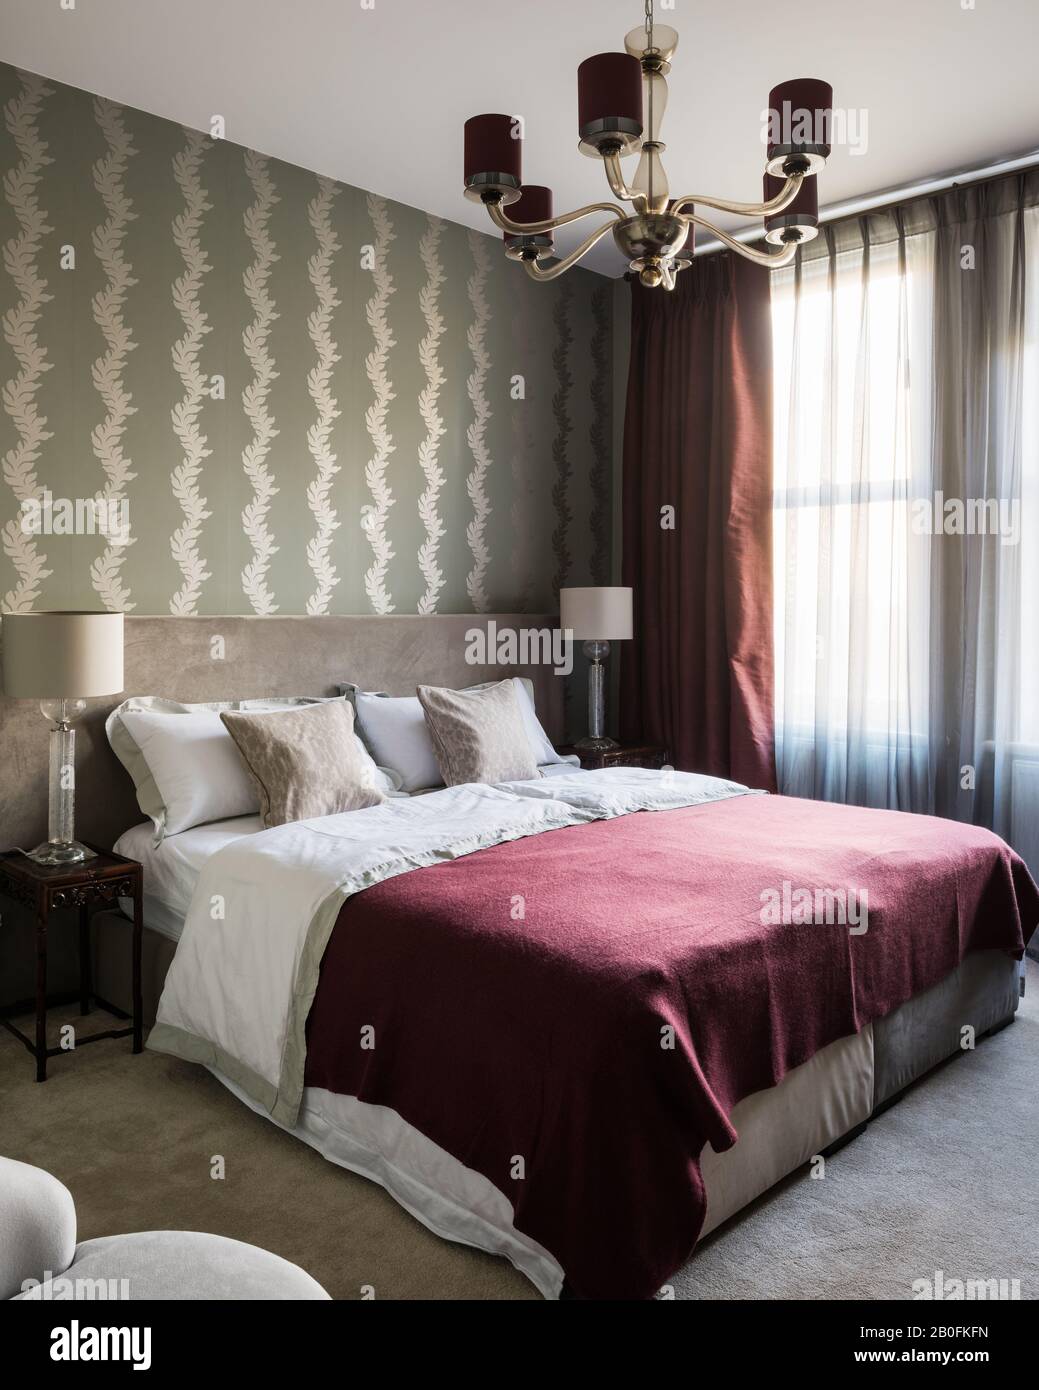 Burgundy blanket on double bed with vintage light fitting and closed curtains Stock Photo